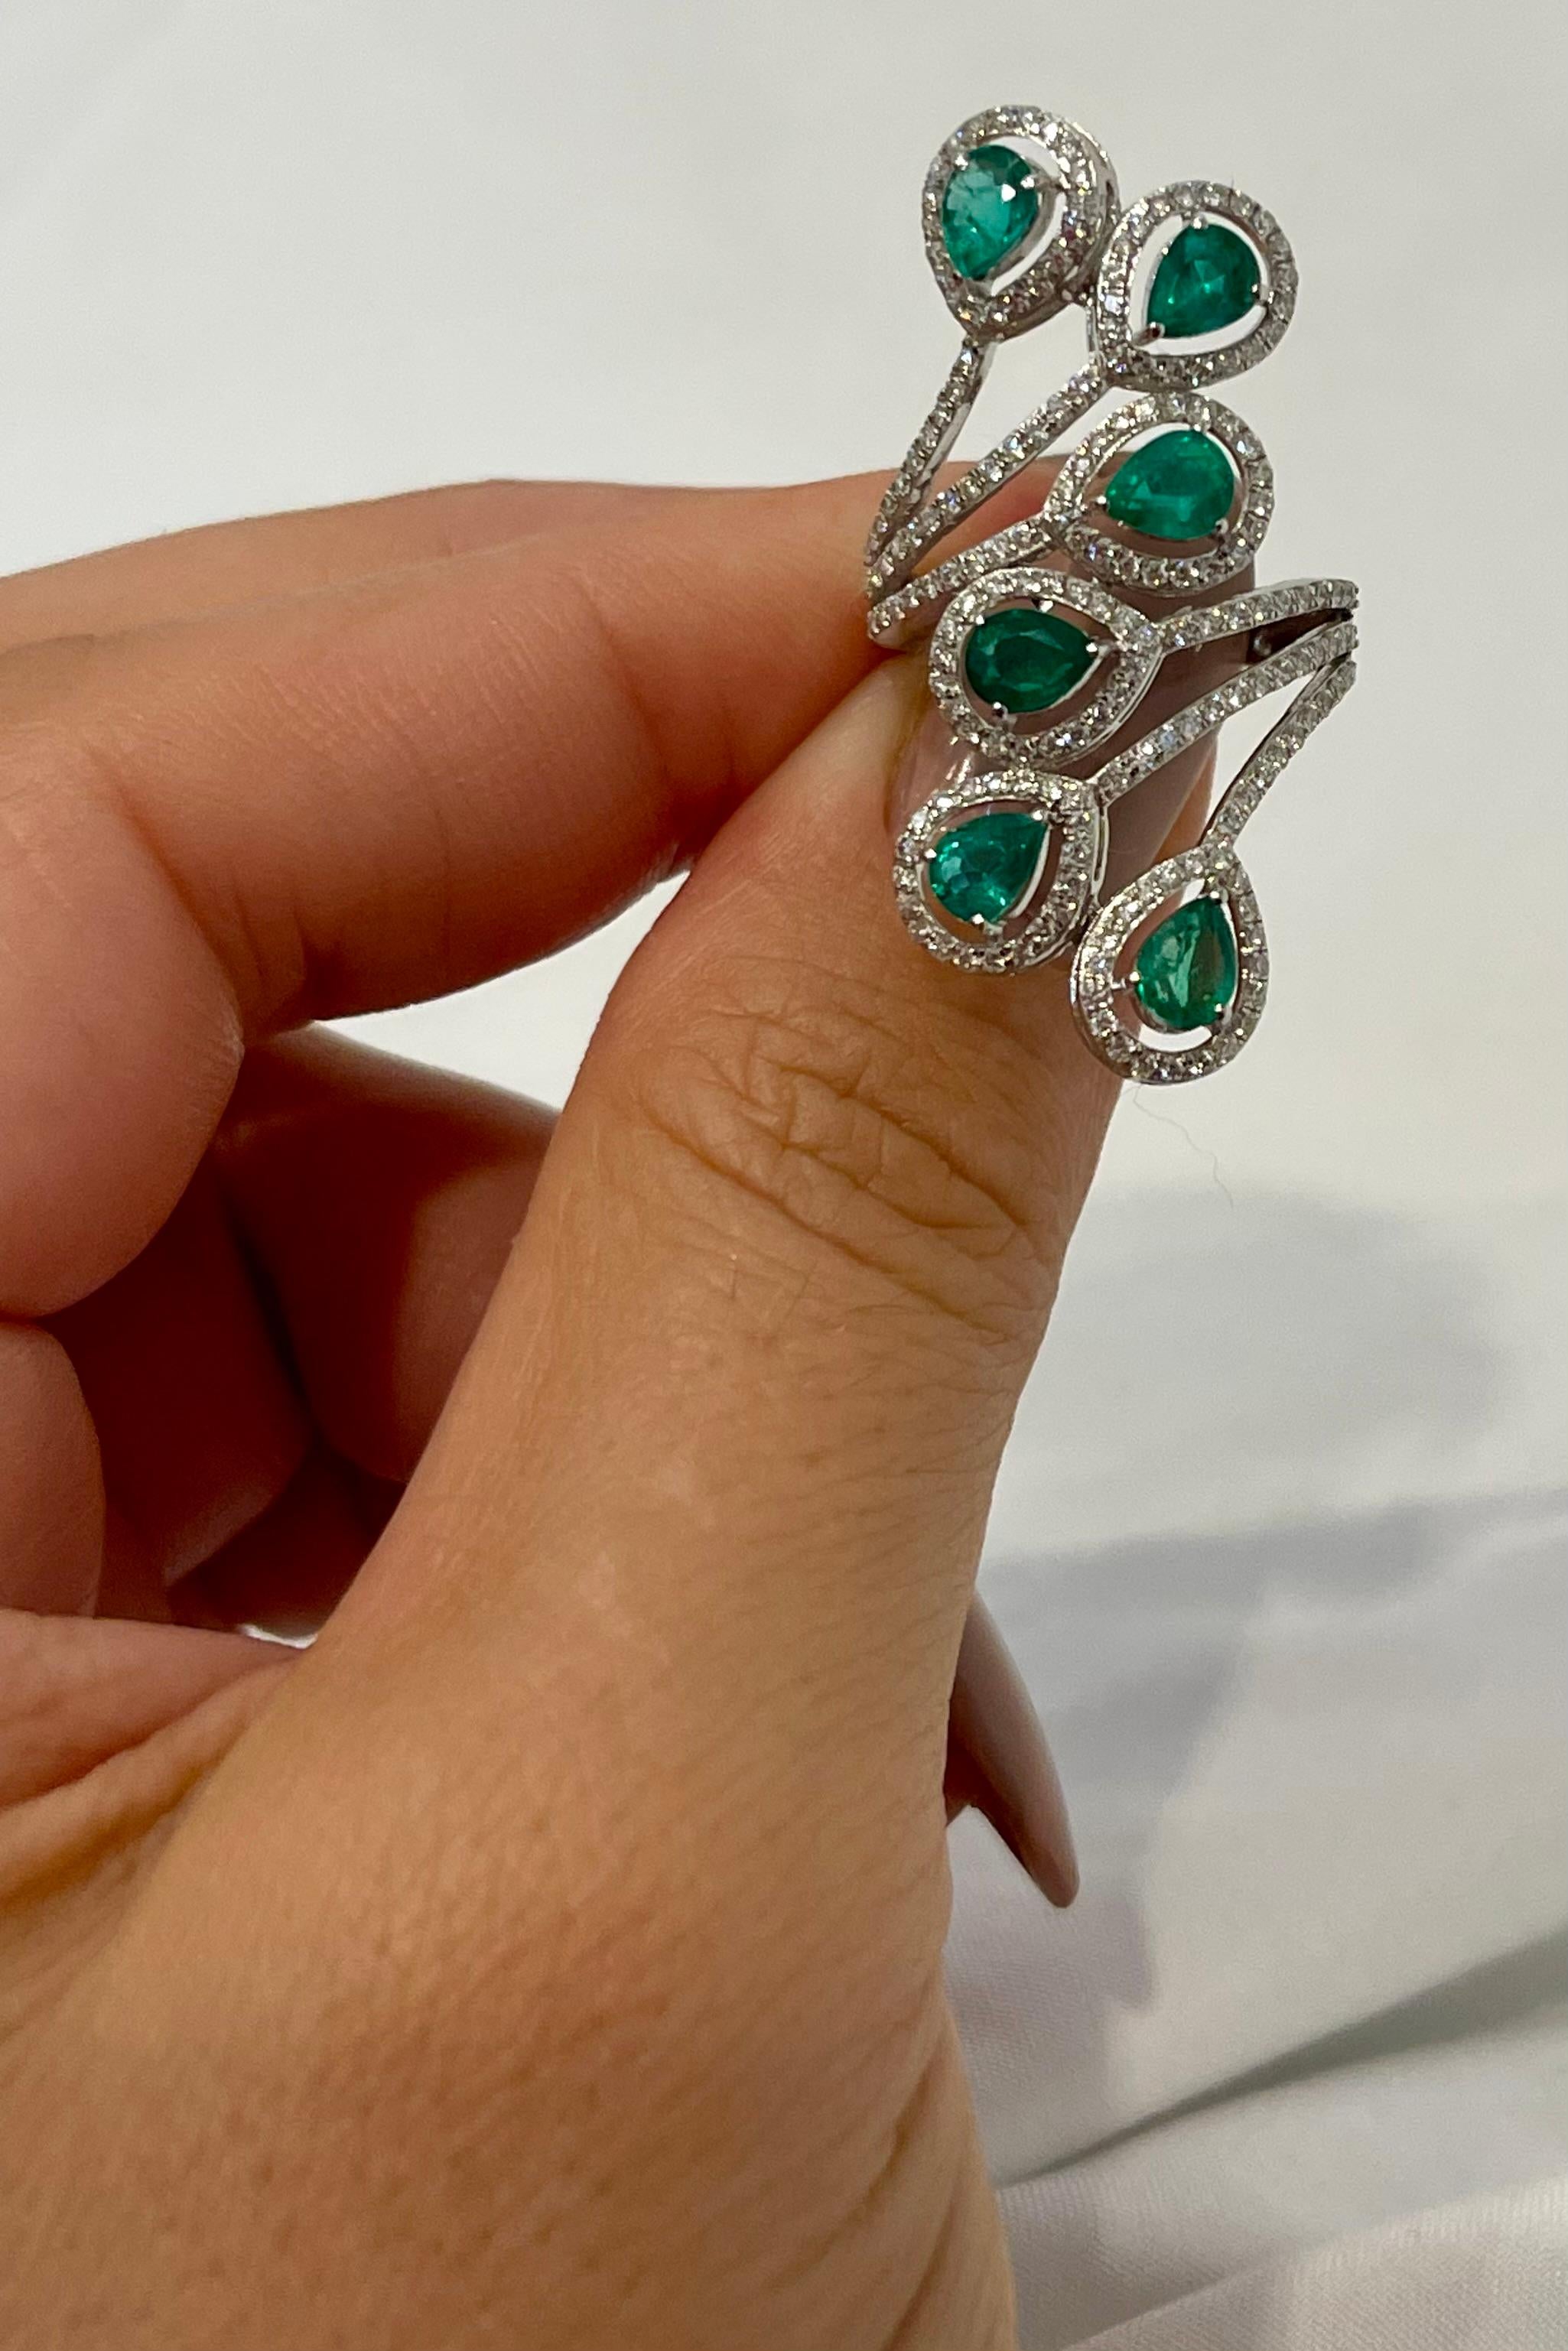 3 Ct Natural  Zambian Emeralds and 1.2 Ct Diamond Ring in 14 karat White Gold For Sale 5